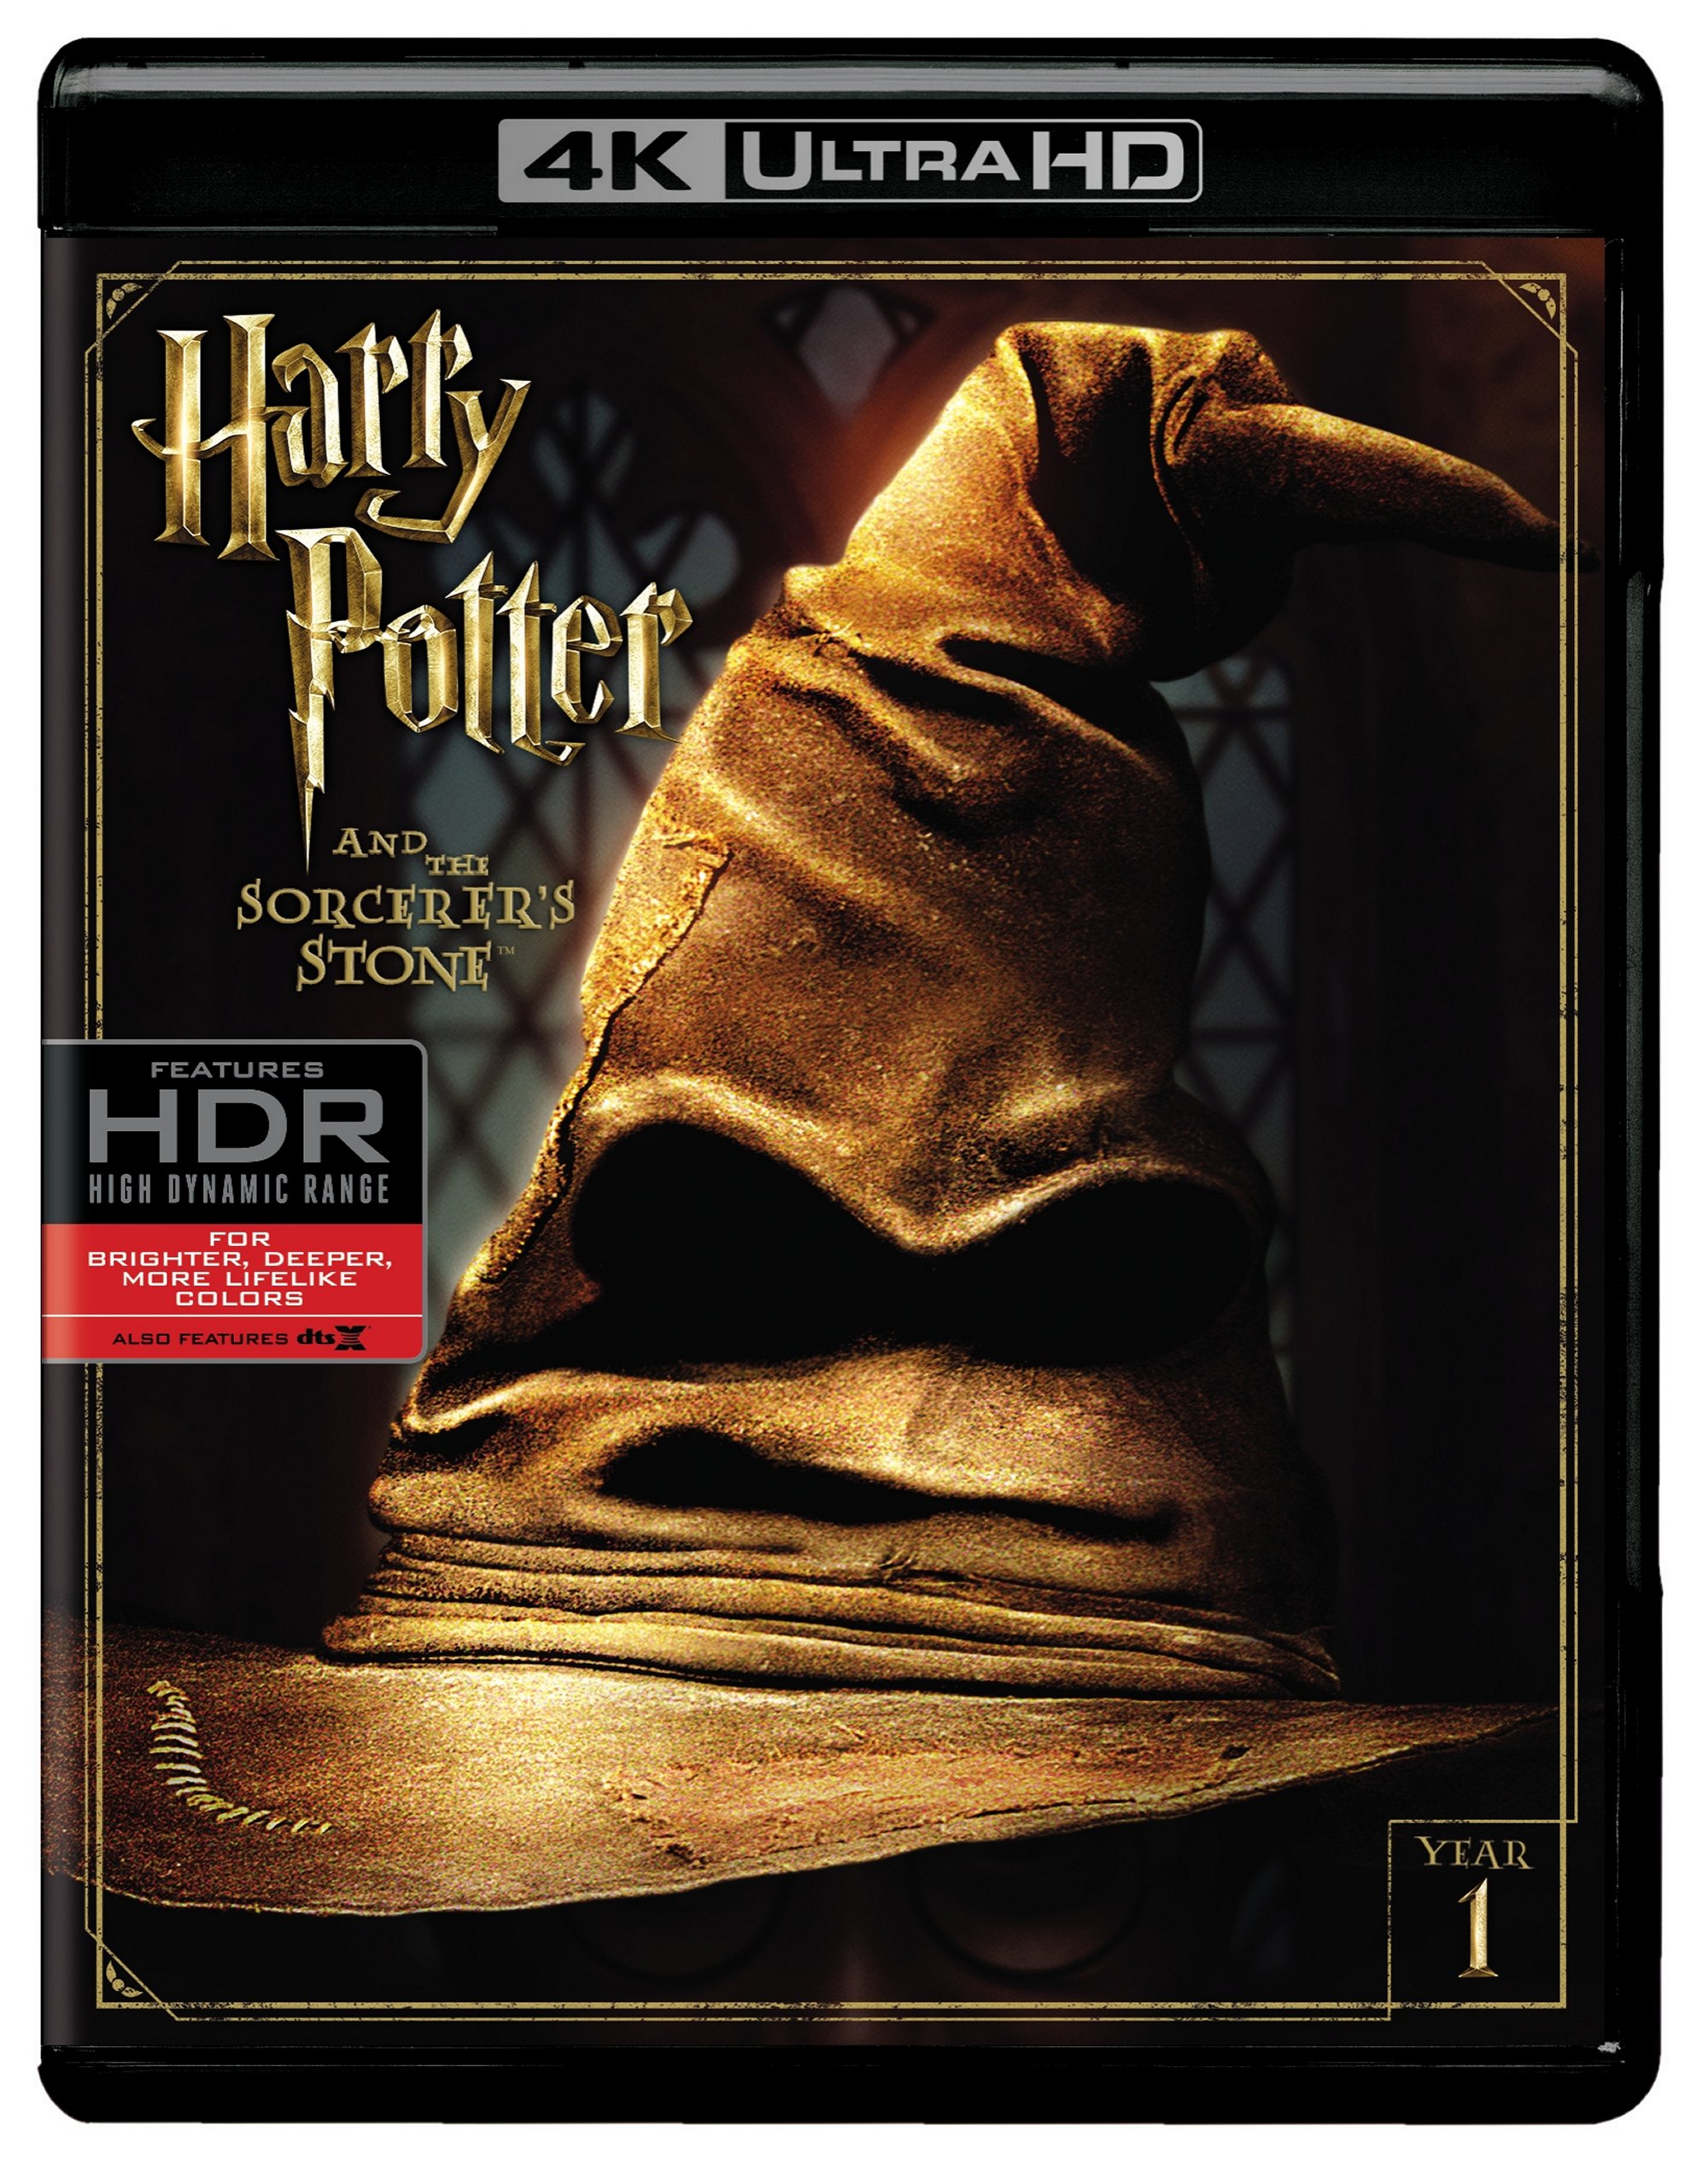 Harry Potter And The Philosopher's Stone (4K Ultra HD) - UHD [ 2001 ]  - Adventure Movies On 4K Ultra HD Blu-ray - Movies On GRUV